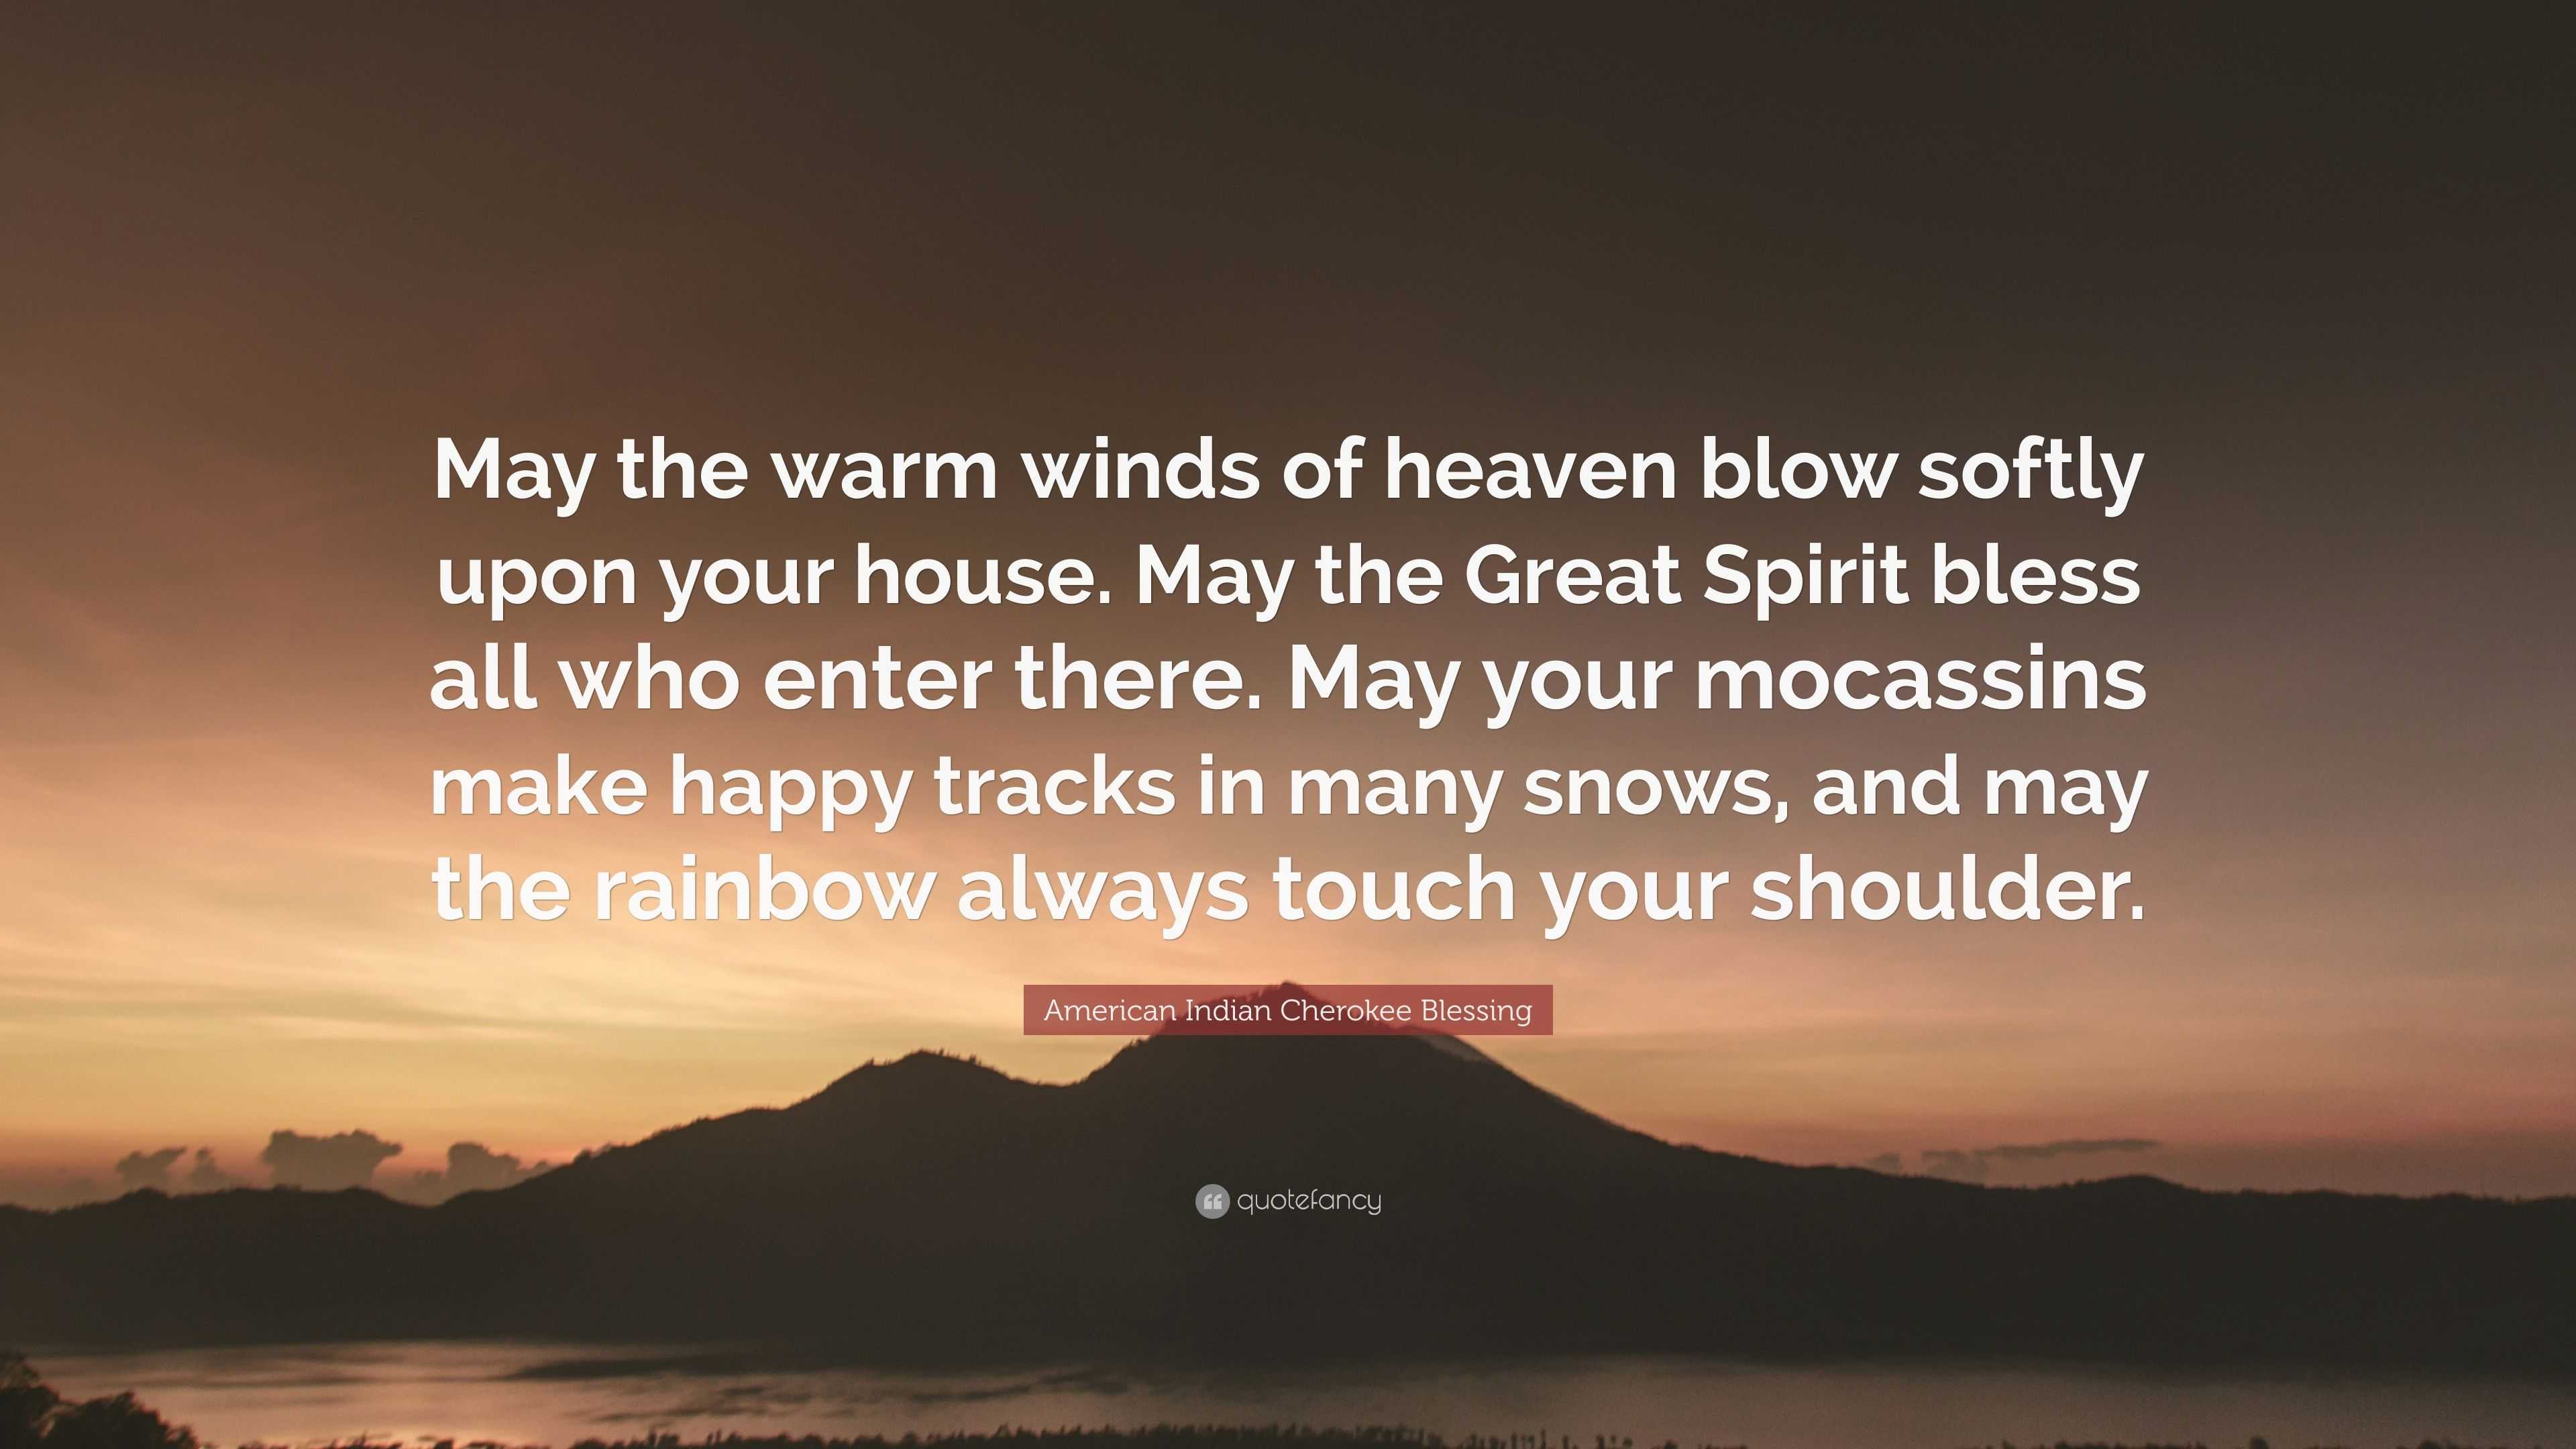 American Indian Cherokee Blessing Quote May The Warm Winds Of